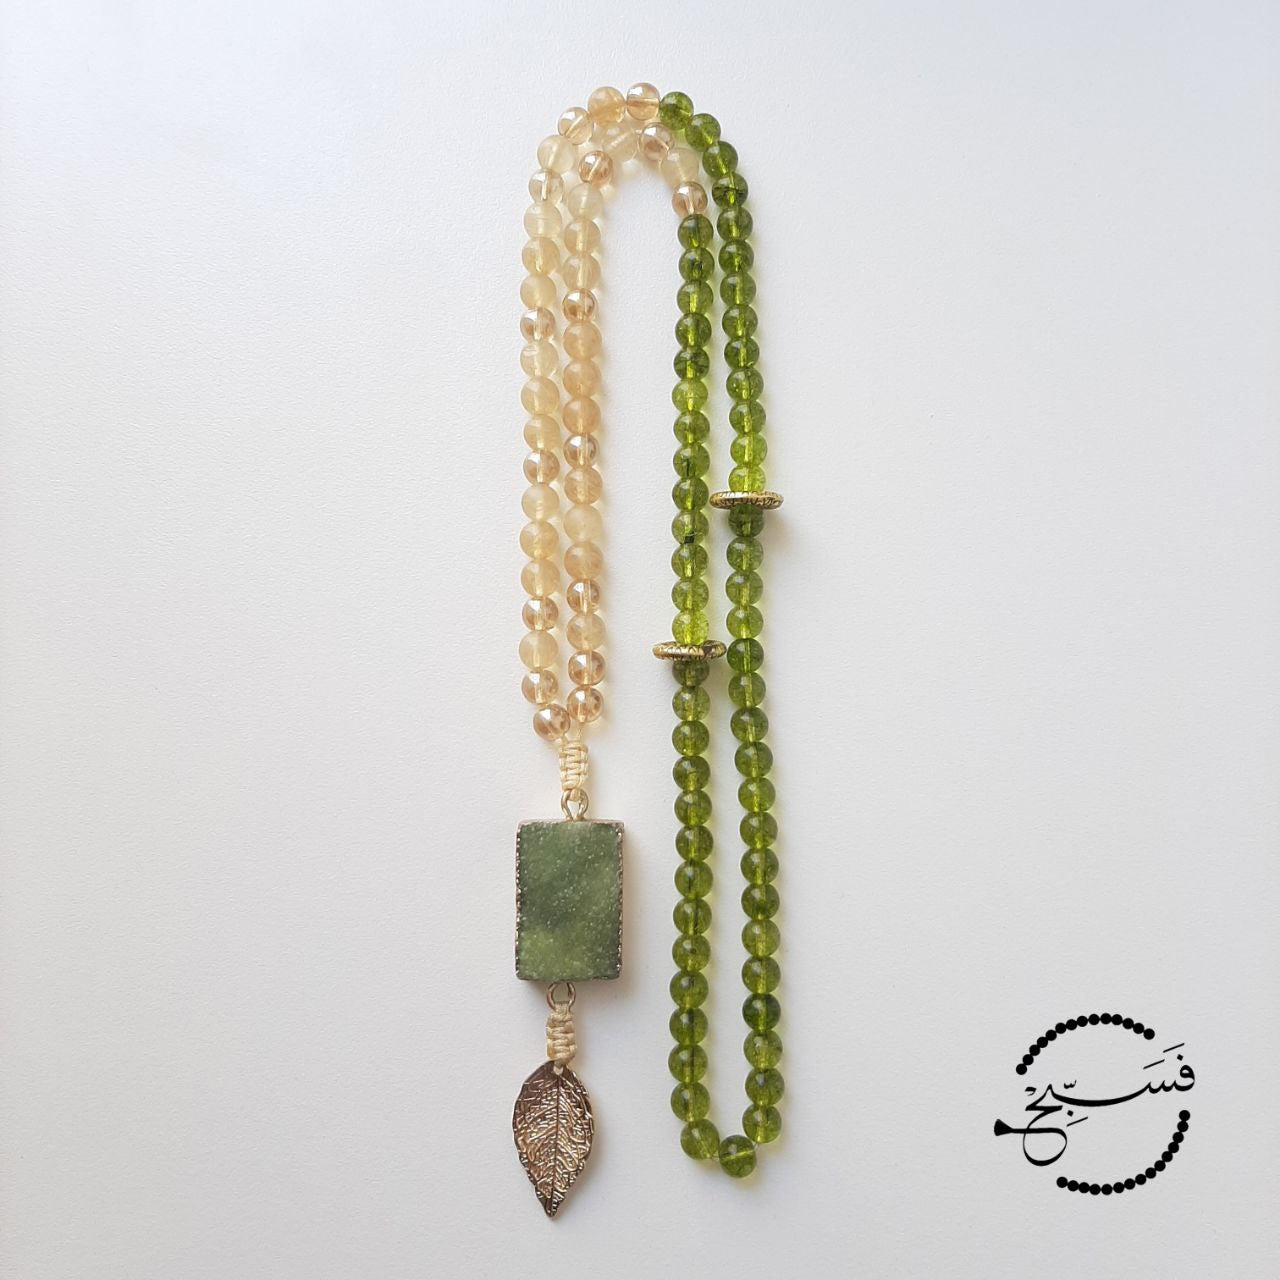 A green druzy pendant with gorgeous green peridot and smoky quartz beads.  Packaged in a luxurious pouch and a gift box.  99 beads